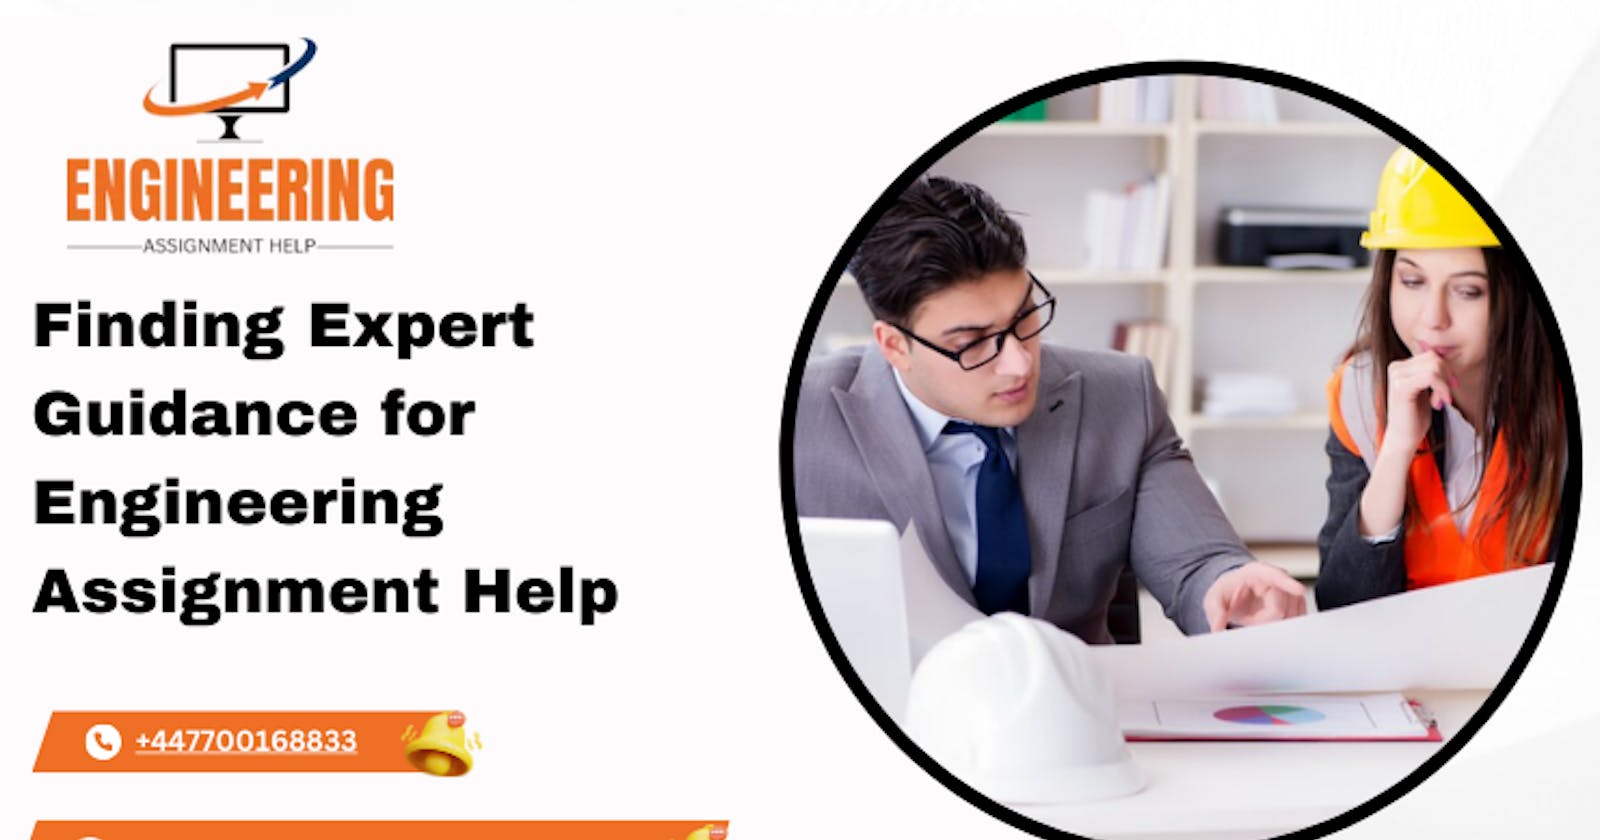 Finding Expert Guidance for Engineering Assignment Help